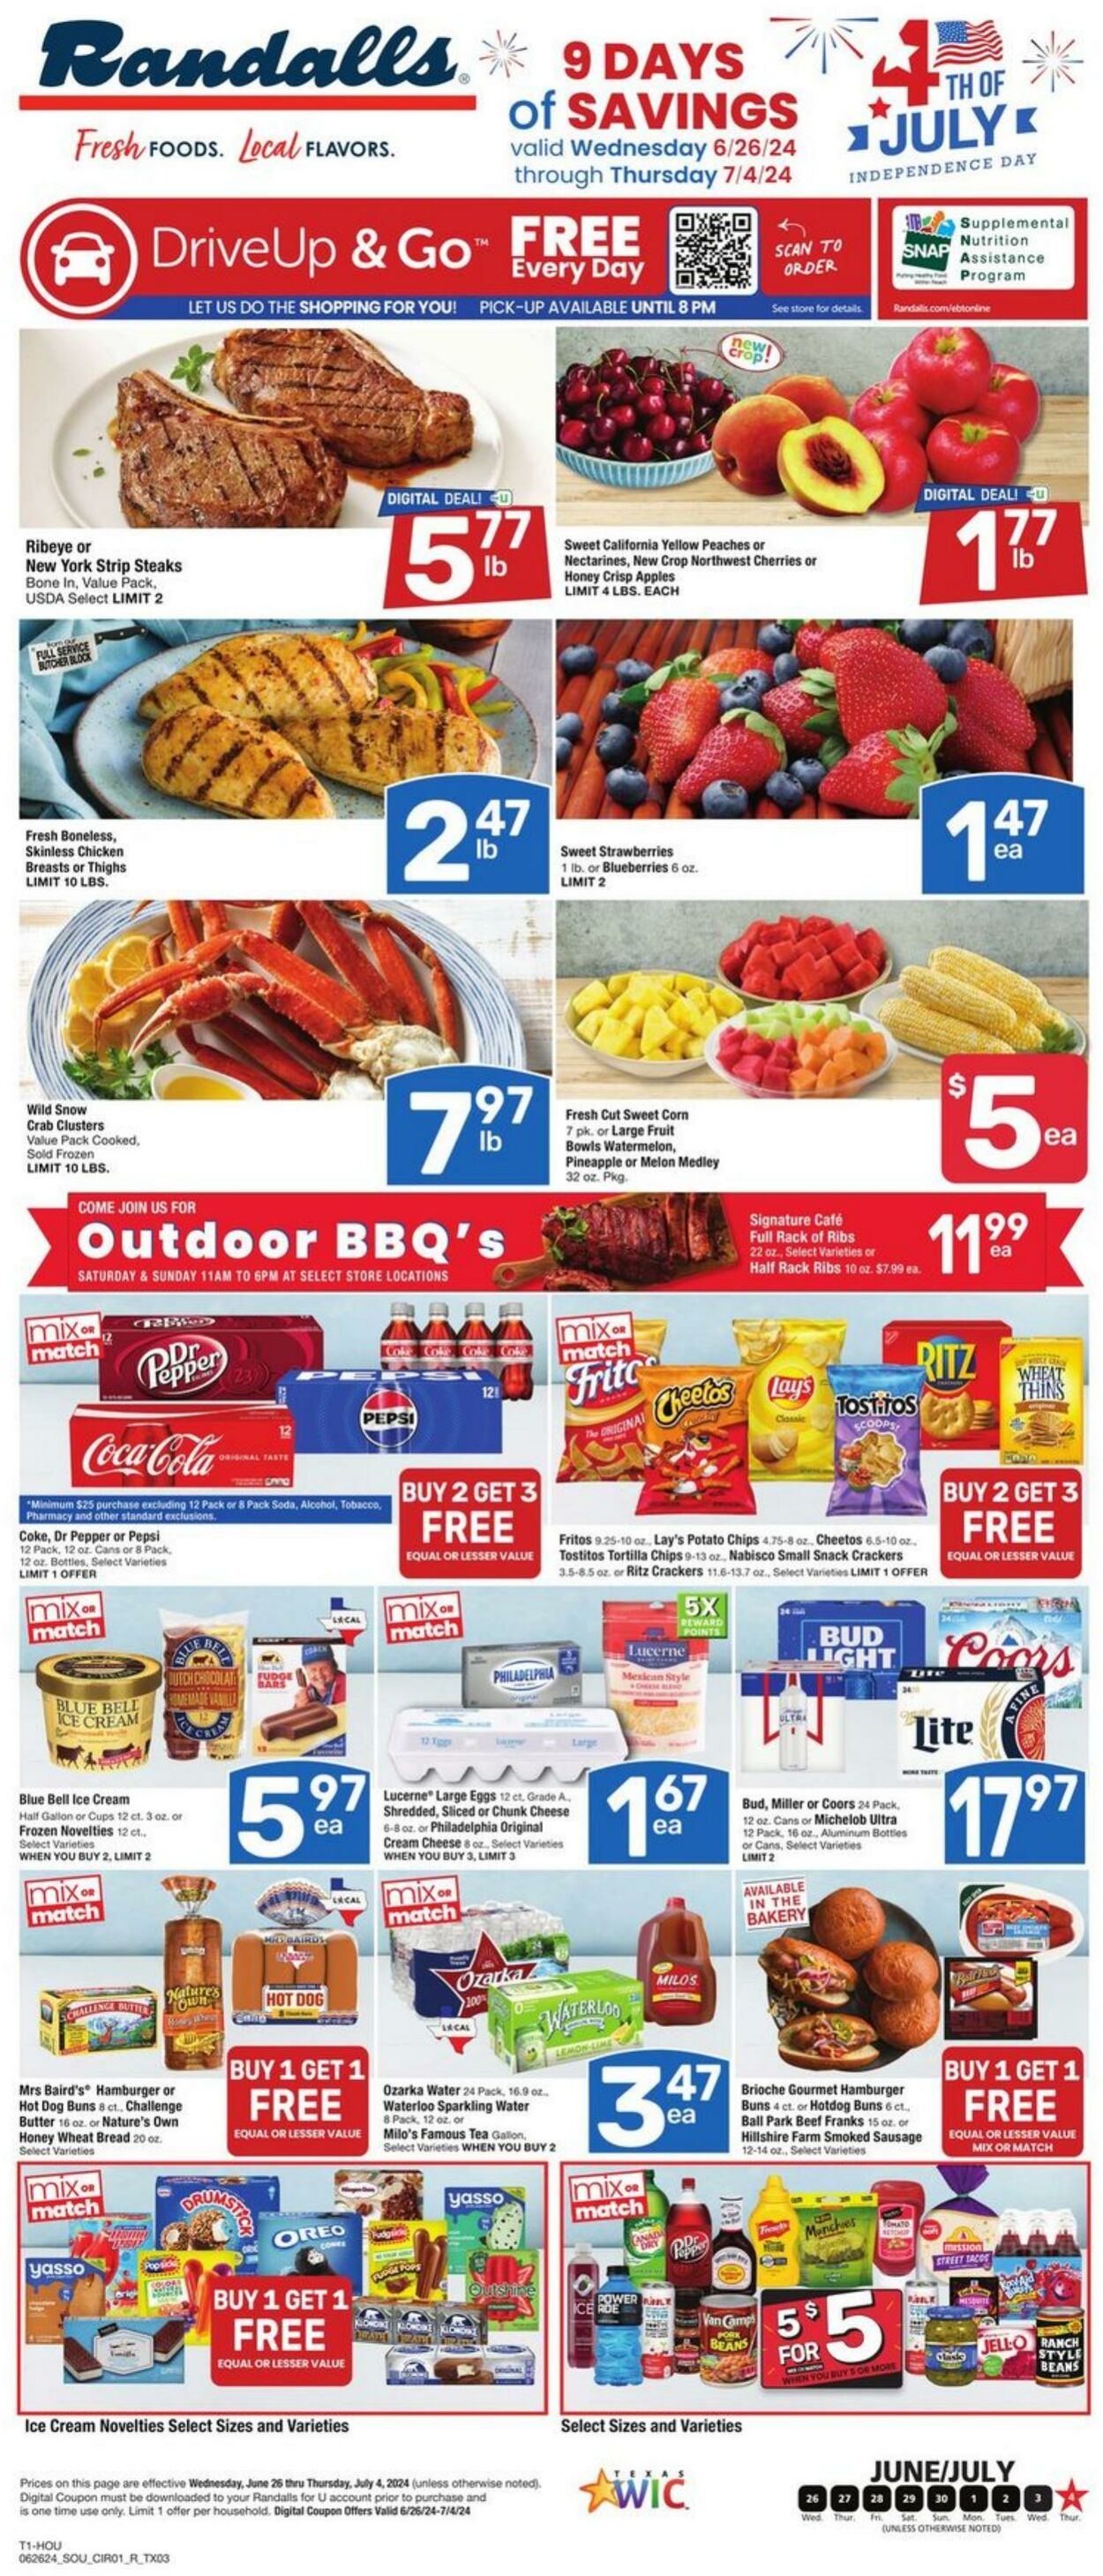 Randalls Promotional weekly ads